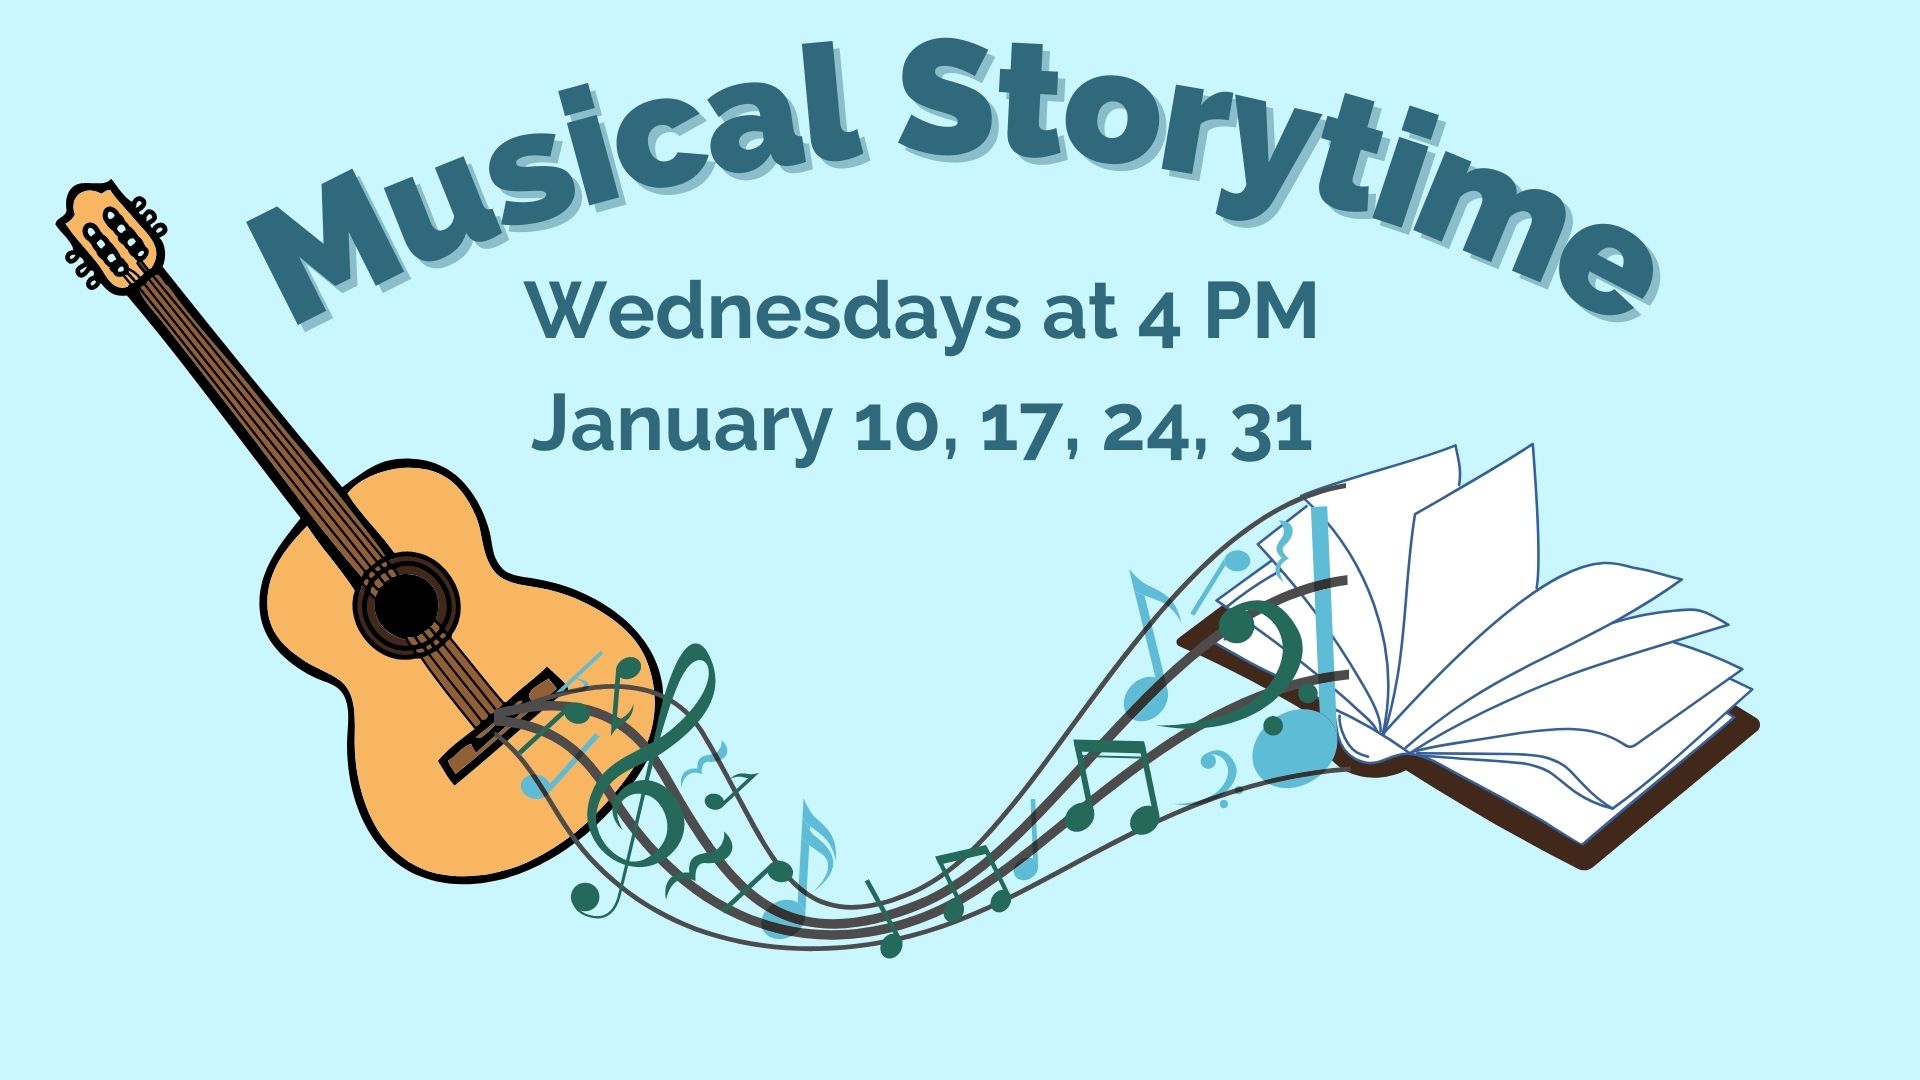 Musical Storytime logo with dates & times